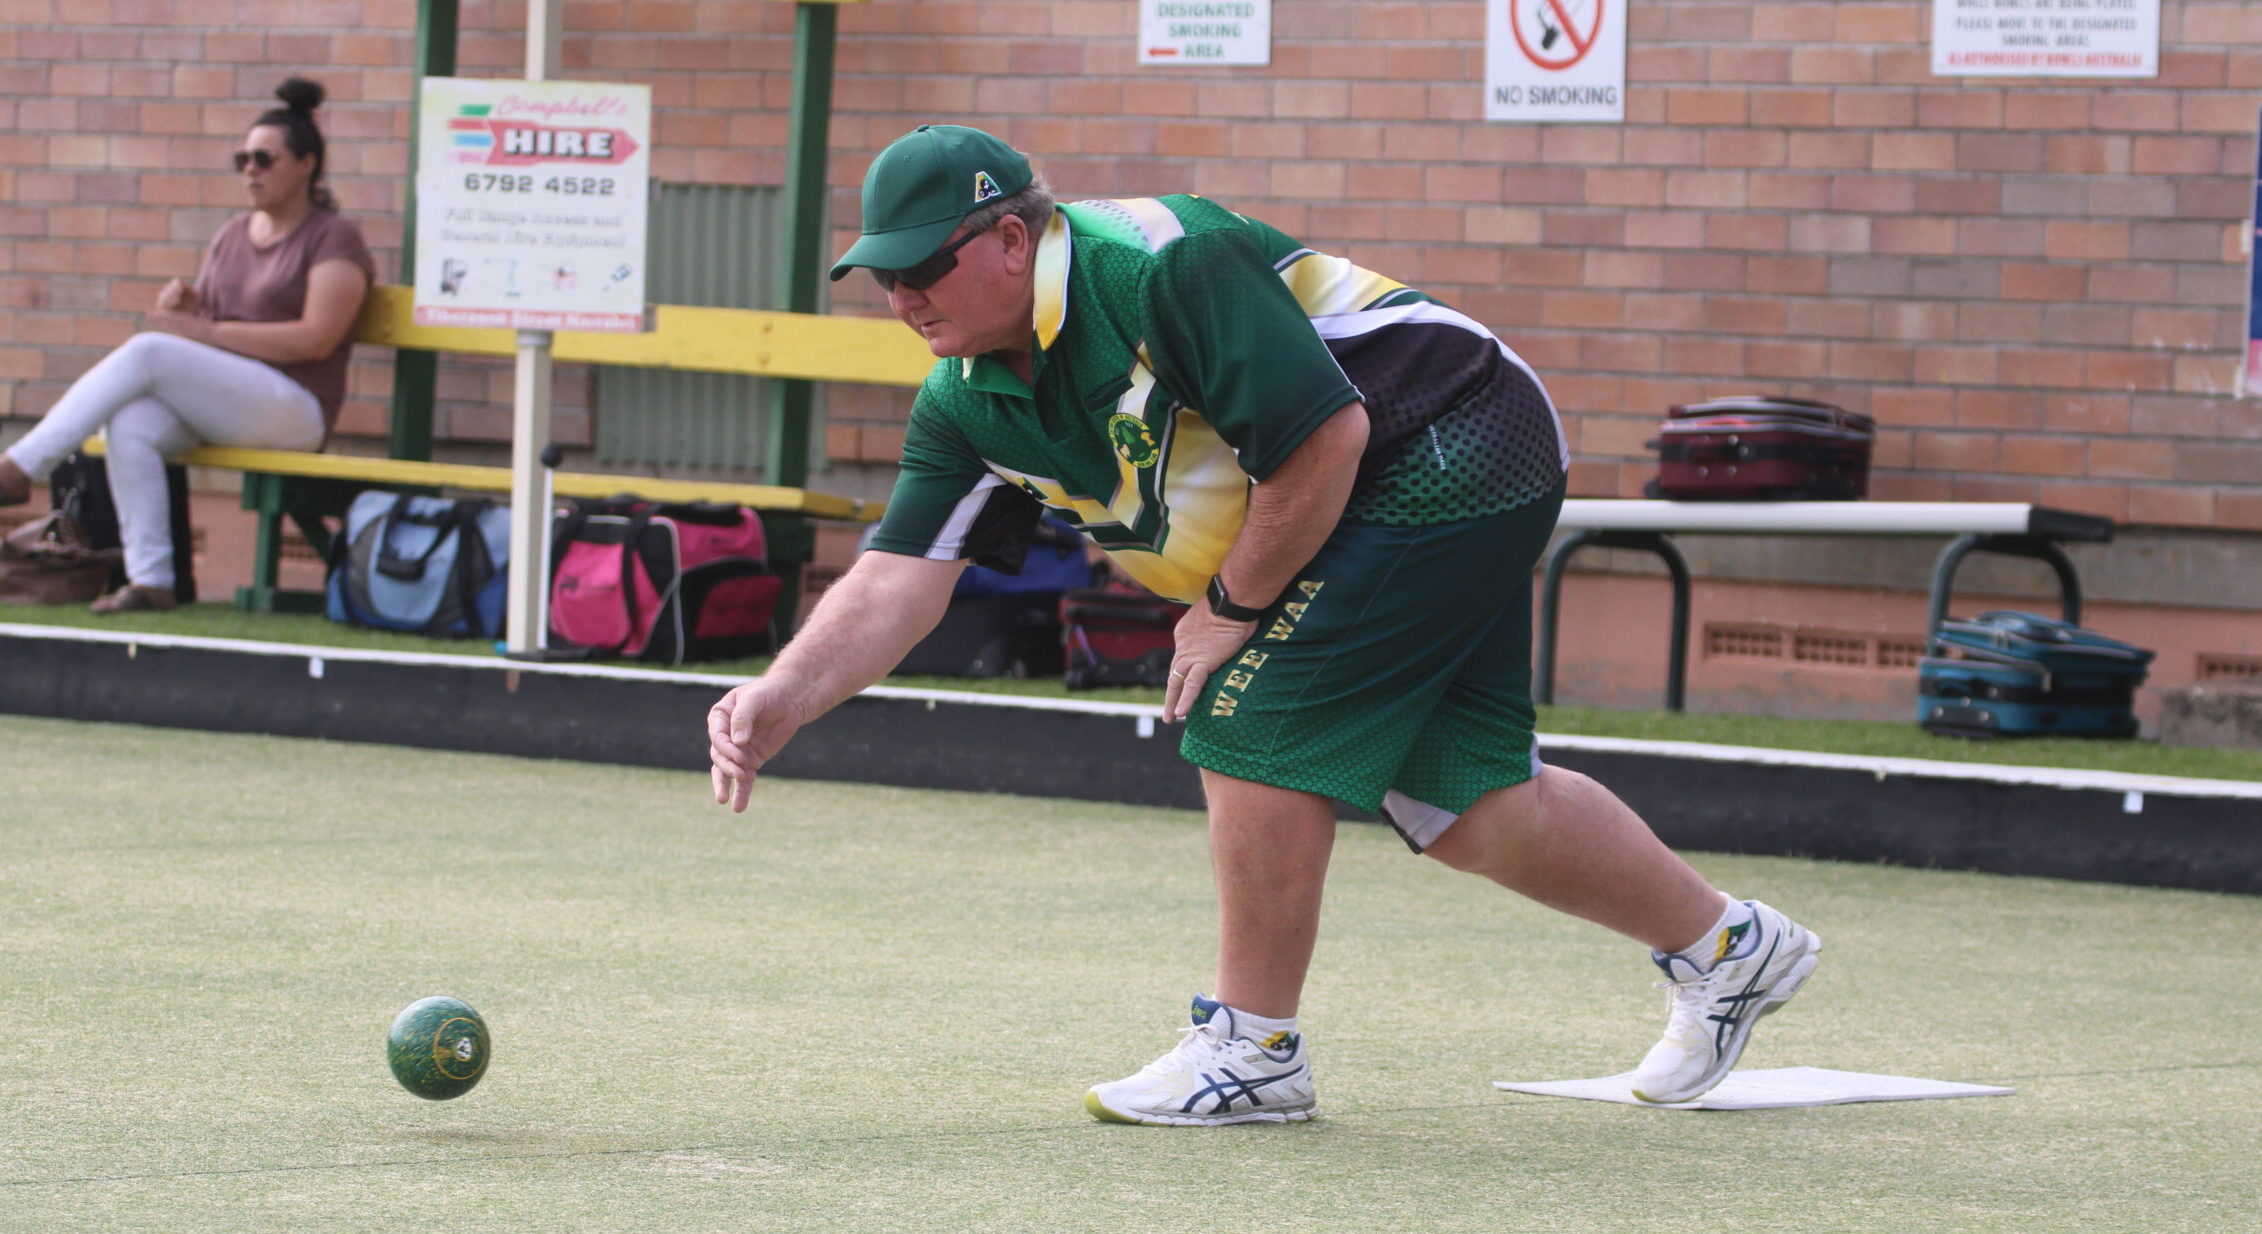 Wee Waa Bowling Club’s Fours finalists decided